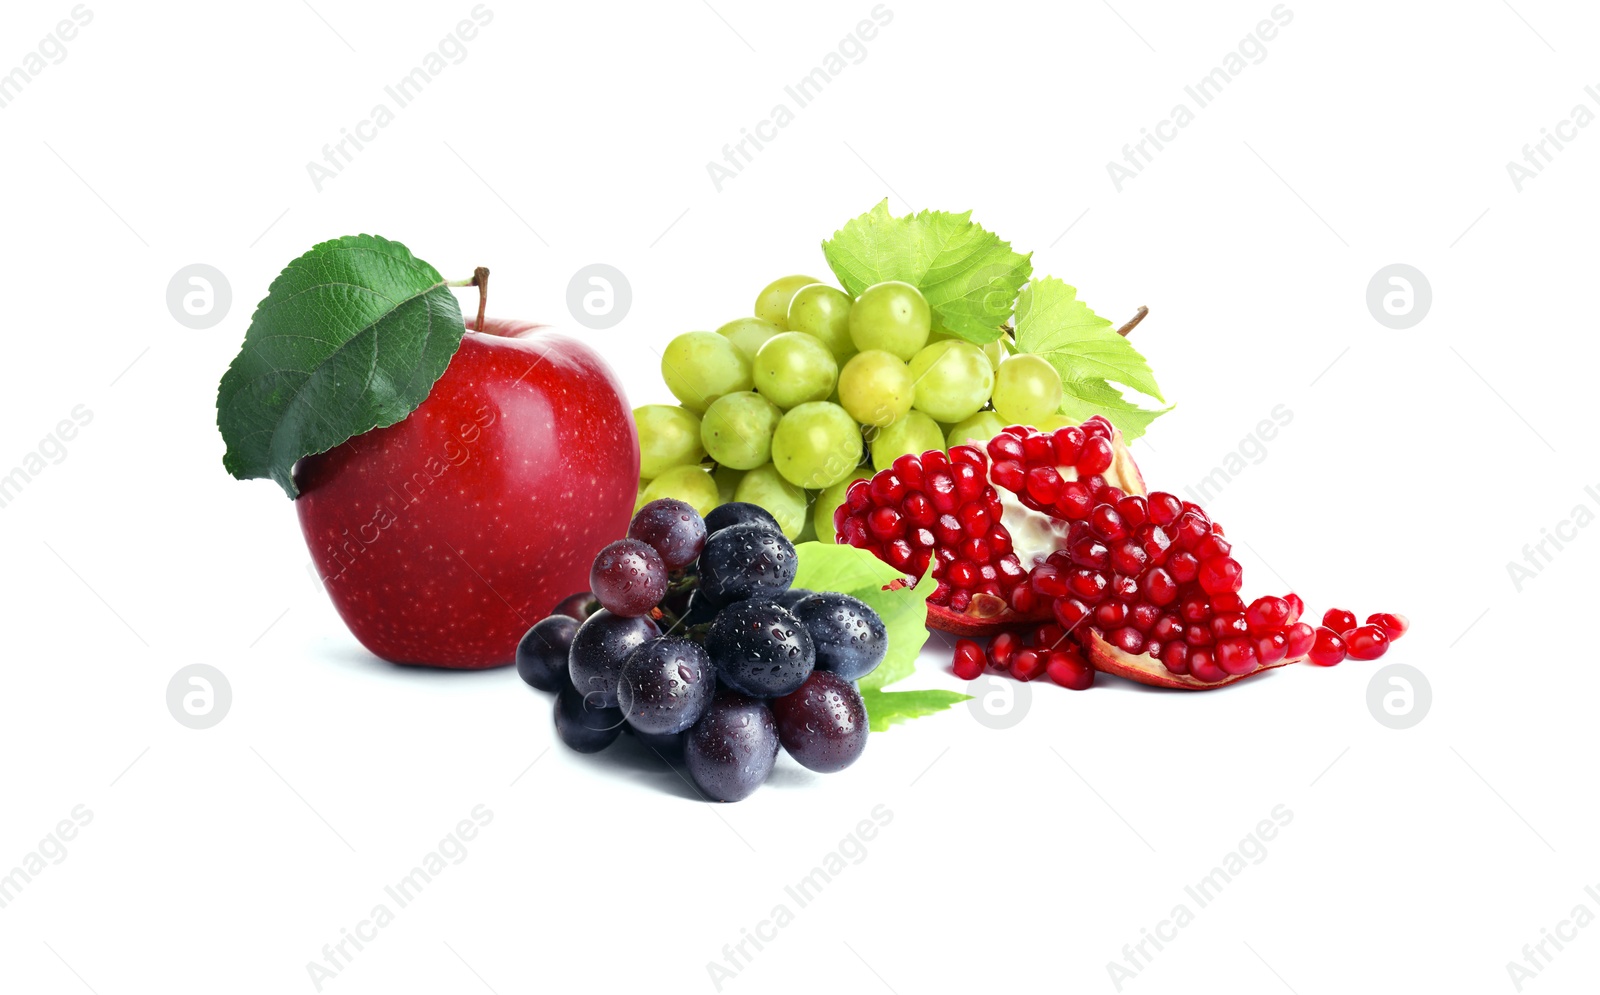 Image of Ripe juicy grapes, apple and pomegranate on white background